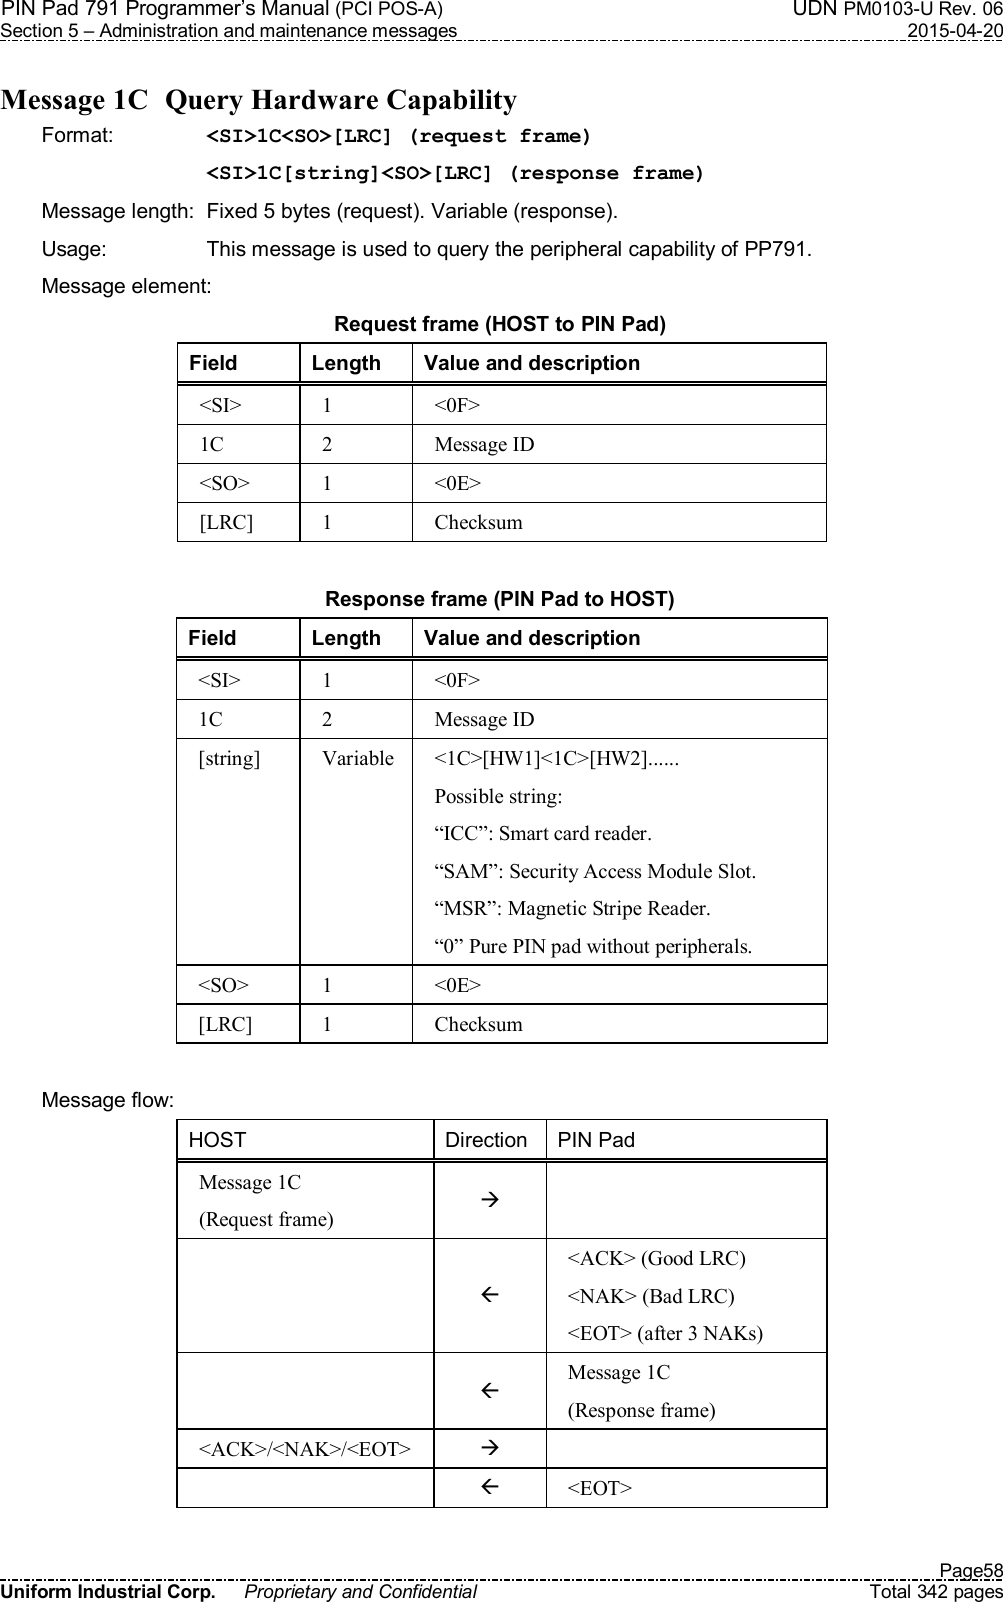 PIN Pad 791 Programmer’s Manual (PCI POS-A)  UDN PM0103-U Rev. 06 Section 5 – Administration and maintenance messages  2015-04-20   Page58 Uniform Industrial Corp.  Proprietary and Confidential  Total 342 pages  Message 1C   Query Hardware Capability Format:    &lt;SI&gt;1C&lt;SO&gt;[LRC] (request frame) &lt;SI&gt;1C[string]&lt;SO&gt;[LRC] (response frame) Message length:  Fixed 5 bytes (request). Variable (response). Usage:  This message is used to query the peripheral capability of PP791. Message element: Request frame (HOST to PIN Pad) Field  Length  Value and description &lt;SI&gt;  1  &lt;0F&gt; 1C  2  Message ID &lt;SO&gt;  1  &lt;0E&gt; [LRC]  1  Checksum  Response frame (PIN Pad to HOST) Field  Length  Value and description &lt;SI&gt;  1  &lt;0F&gt; 1C  2  Message ID [string]  Variable  &lt;1C&gt;[HW1]&lt;1C&gt;[HW2]...... Possible string: “ICC”: Smart card reader. “SAM”: Security Access Module Slot. “MSR”: Magnetic Stripe Reader. “0” Pure PIN pad without peripherals. &lt;SO&gt;  1  &lt;0E&gt; [LRC]  1  Checksum  Message flow: HOST  Direction  PIN Pad Message 1C (Request frame)     &lt;ACK&gt; (Good LRC) &lt;NAK&gt; (Bad LRC) &lt;EOT&gt; (after 3 NAKs)   Message 1C (Response frame) &lt;ACK&gt;/&lt;NAK&gt;/&lt;EOT&gt;      &lt;EOT&gt; 